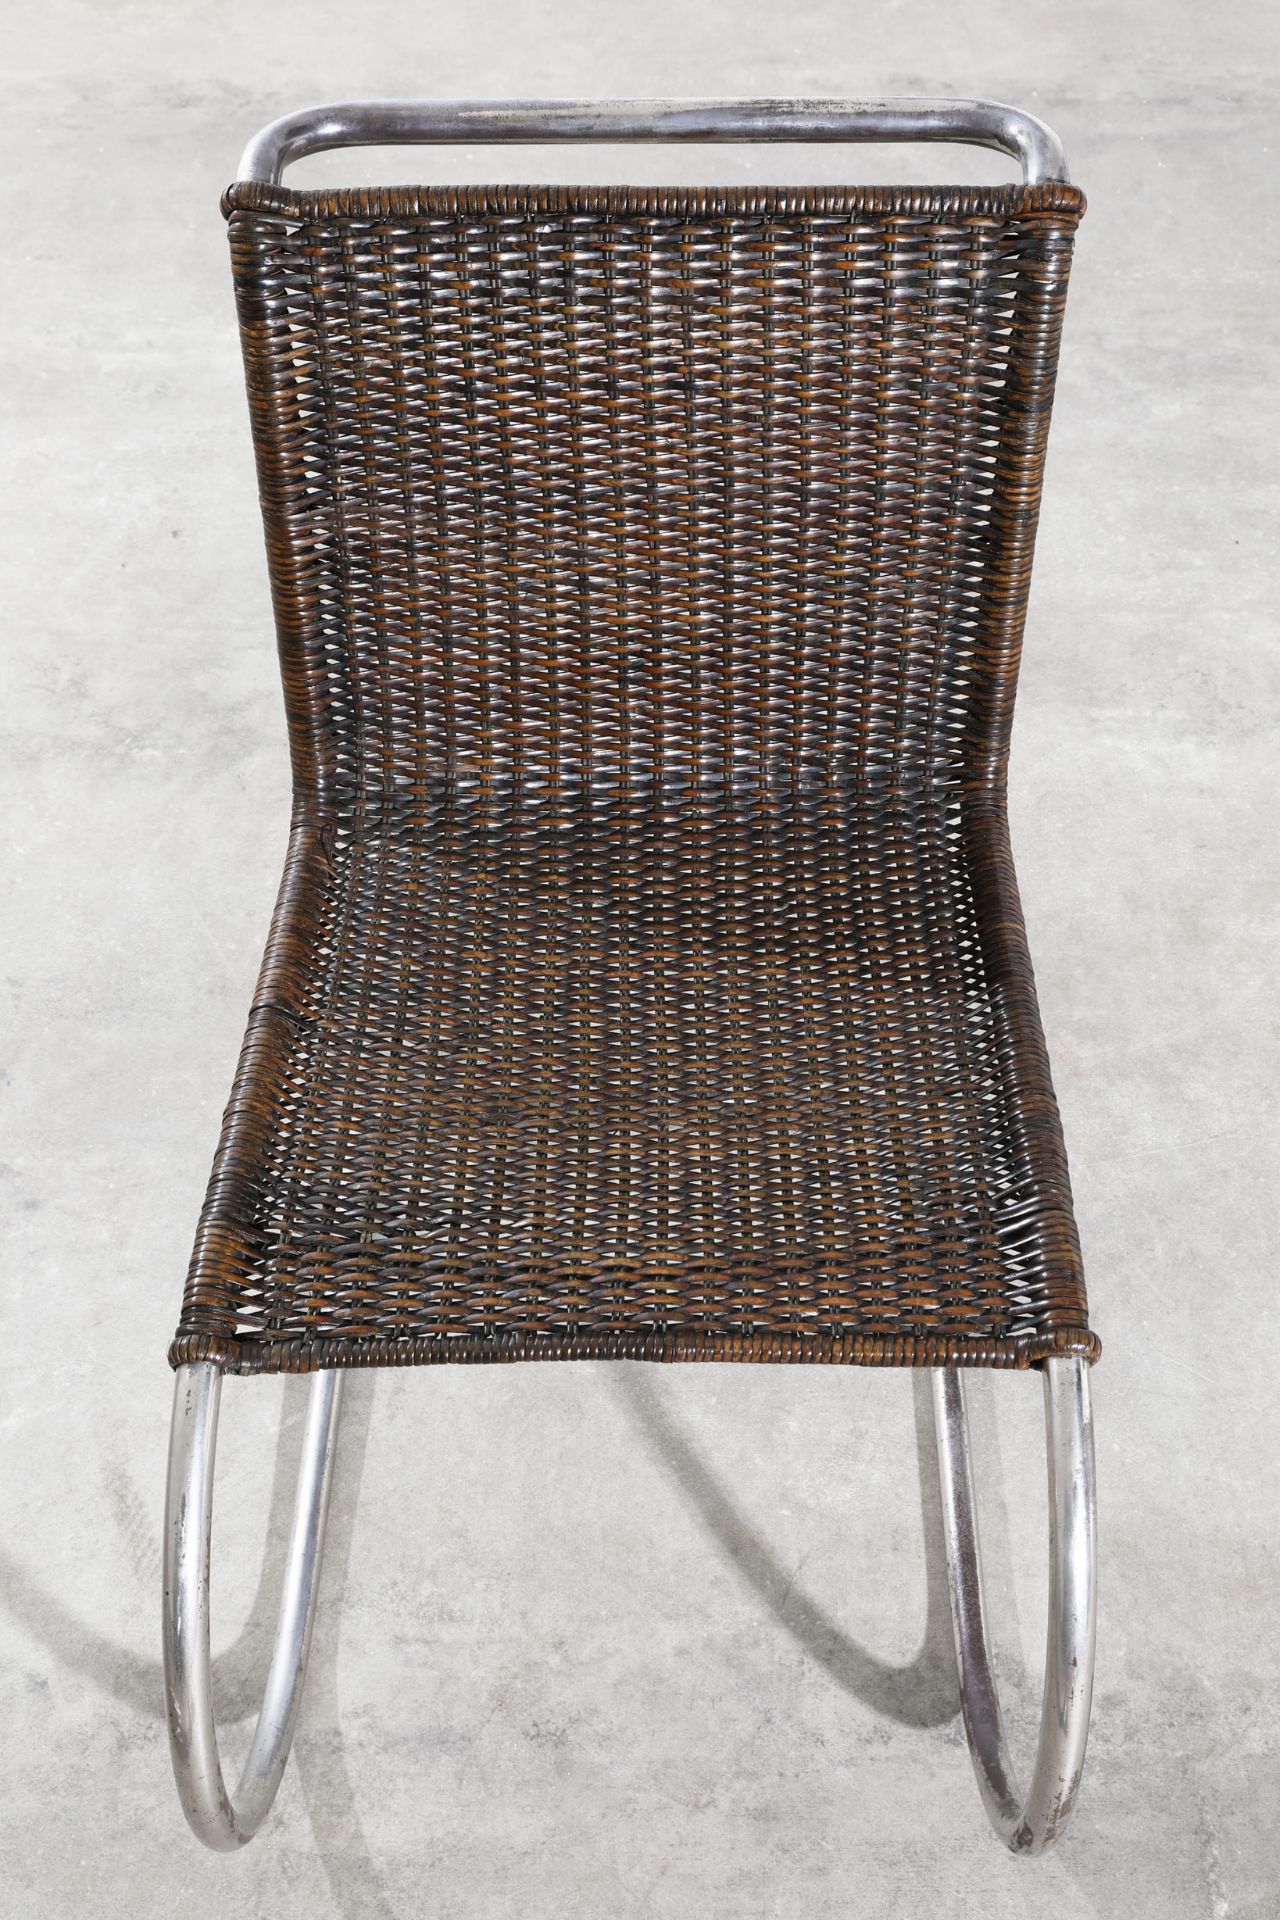 L. Mies van der Rohe, Thonet, early Chair Model MR10 / MR533 - Image 3 of 6